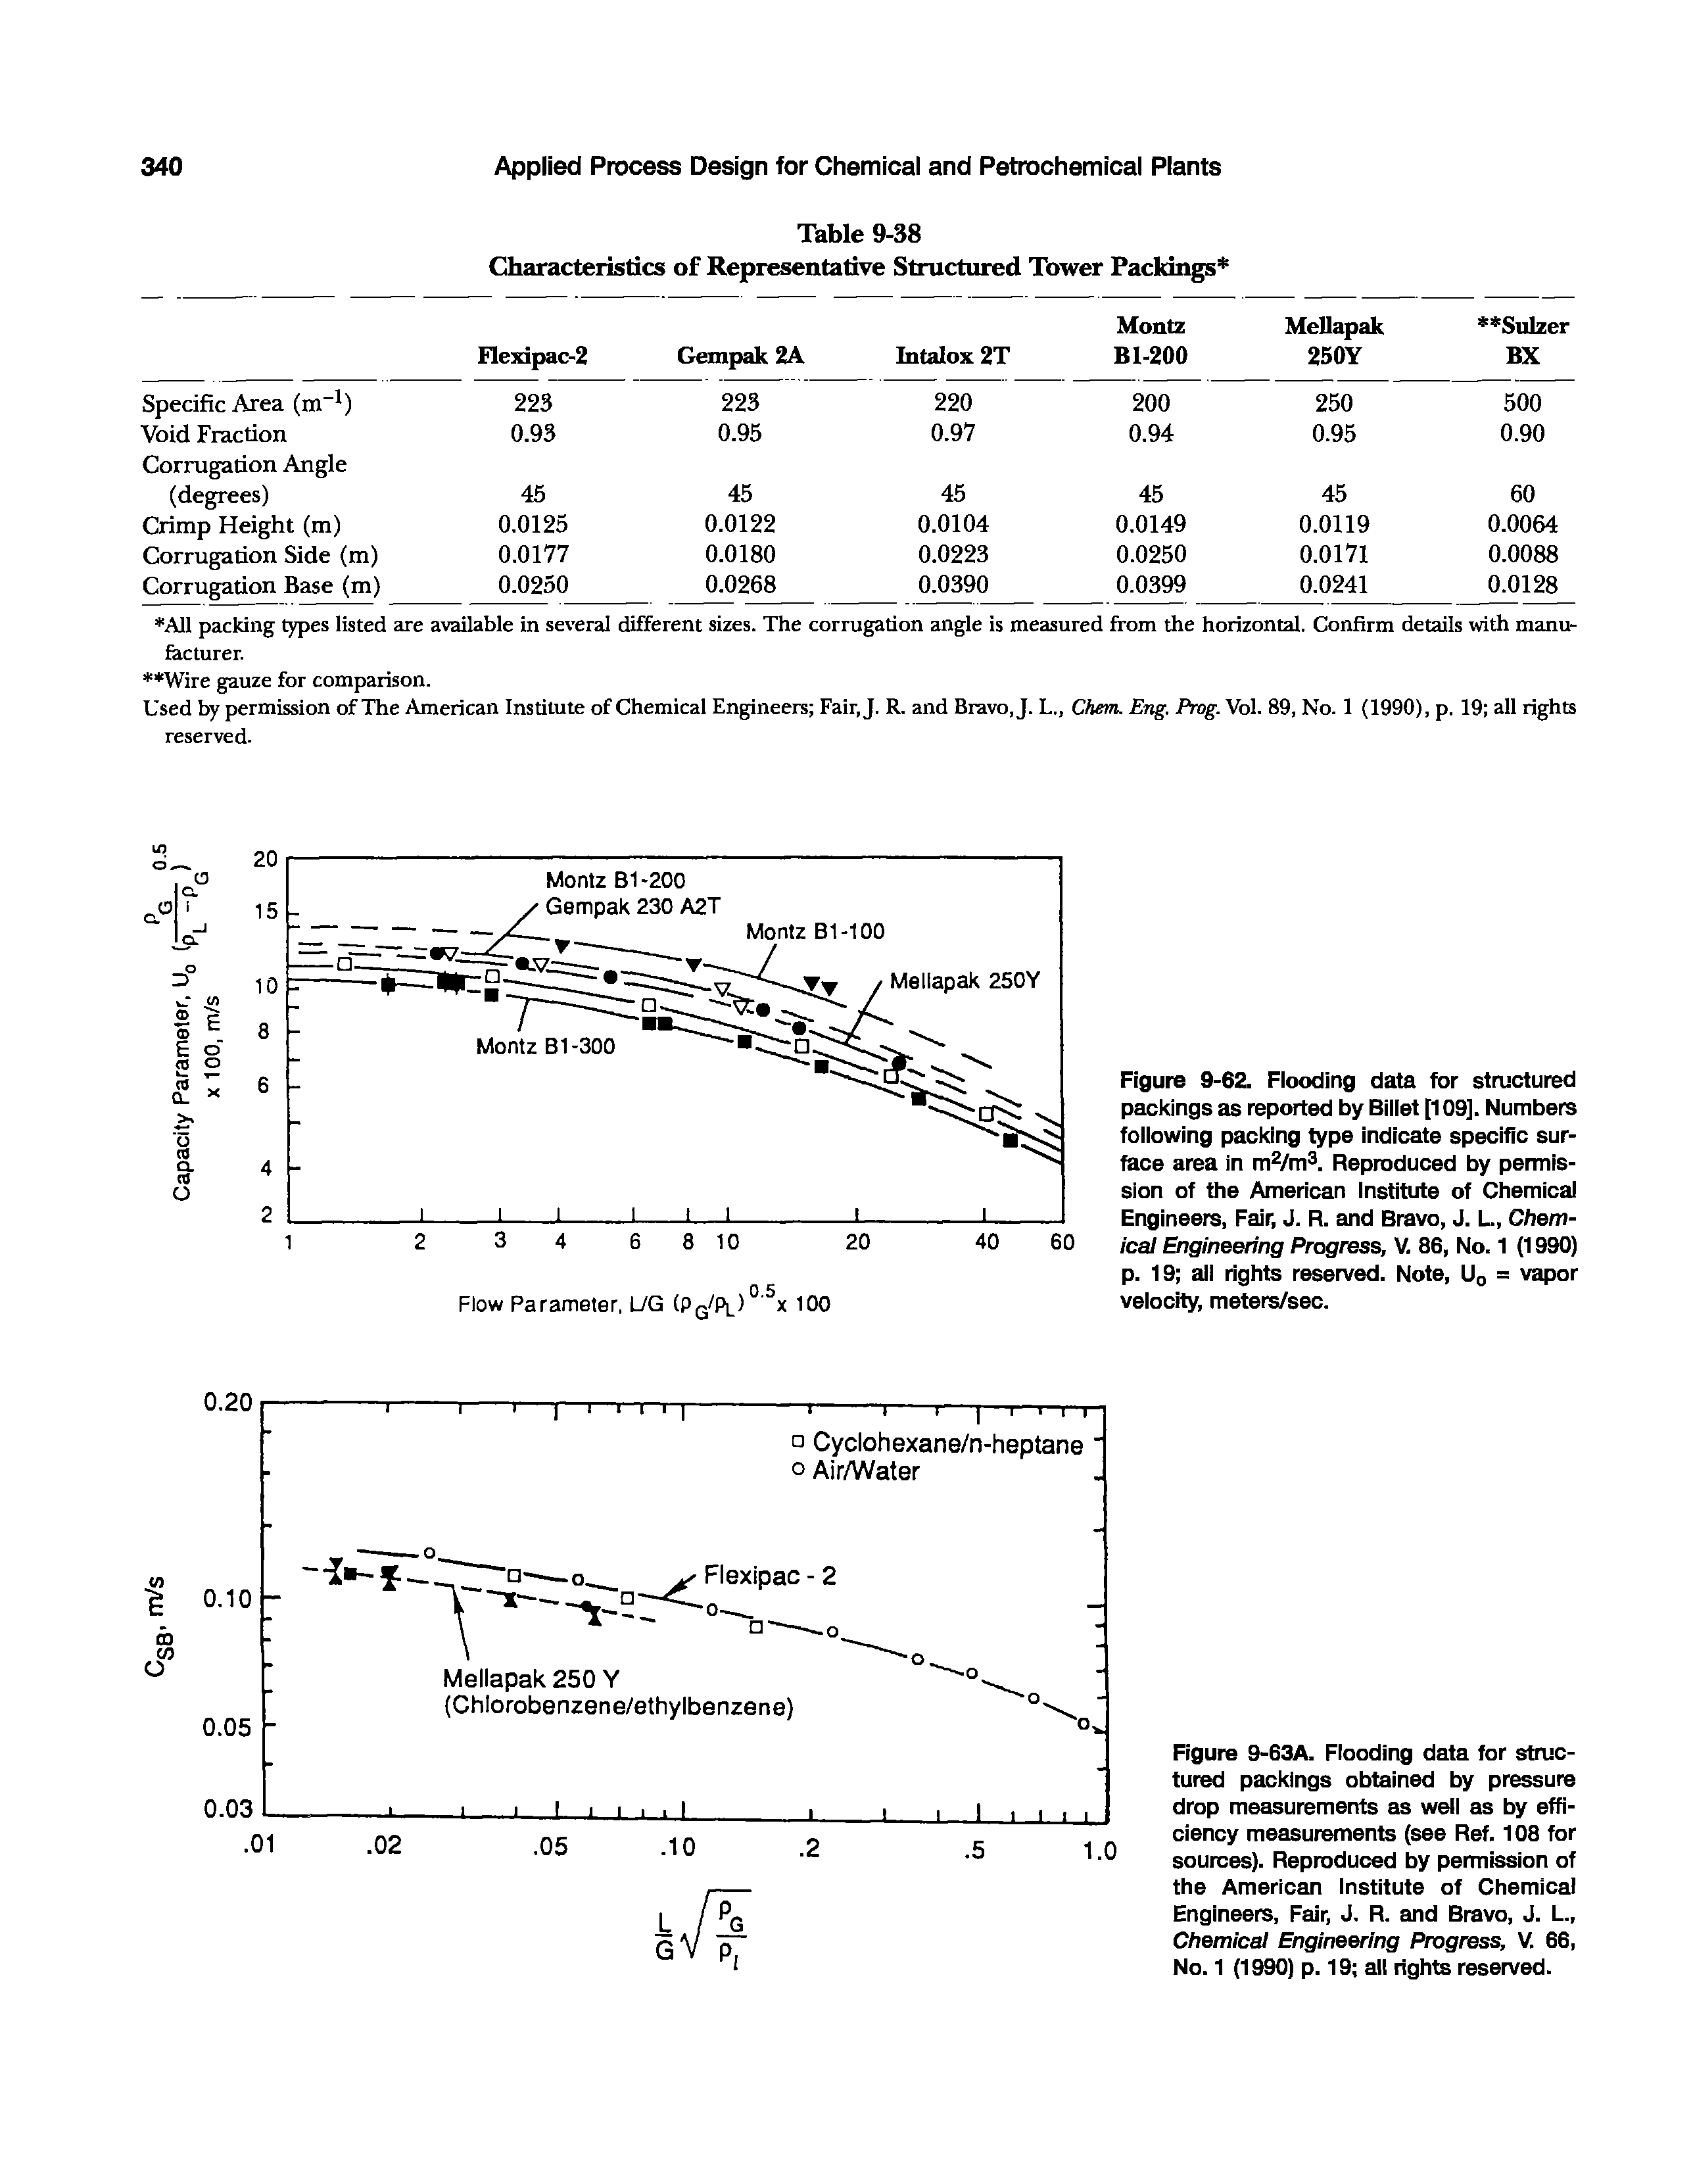 Figure 9-62. Flooding data for structured packings as reported by Billet [109]. Numbers following packing type indicate specific surface area in m /m. Reproduced by pennis-sion of the American Institute of Chemical Engineers, Fair, J. R. and Bravo, J. L., Chemical Engineering Progress, V. 86, No. 1 (1990) p. 19 all rights reserved. Note, Uq = vapor velocity, meters/sec.